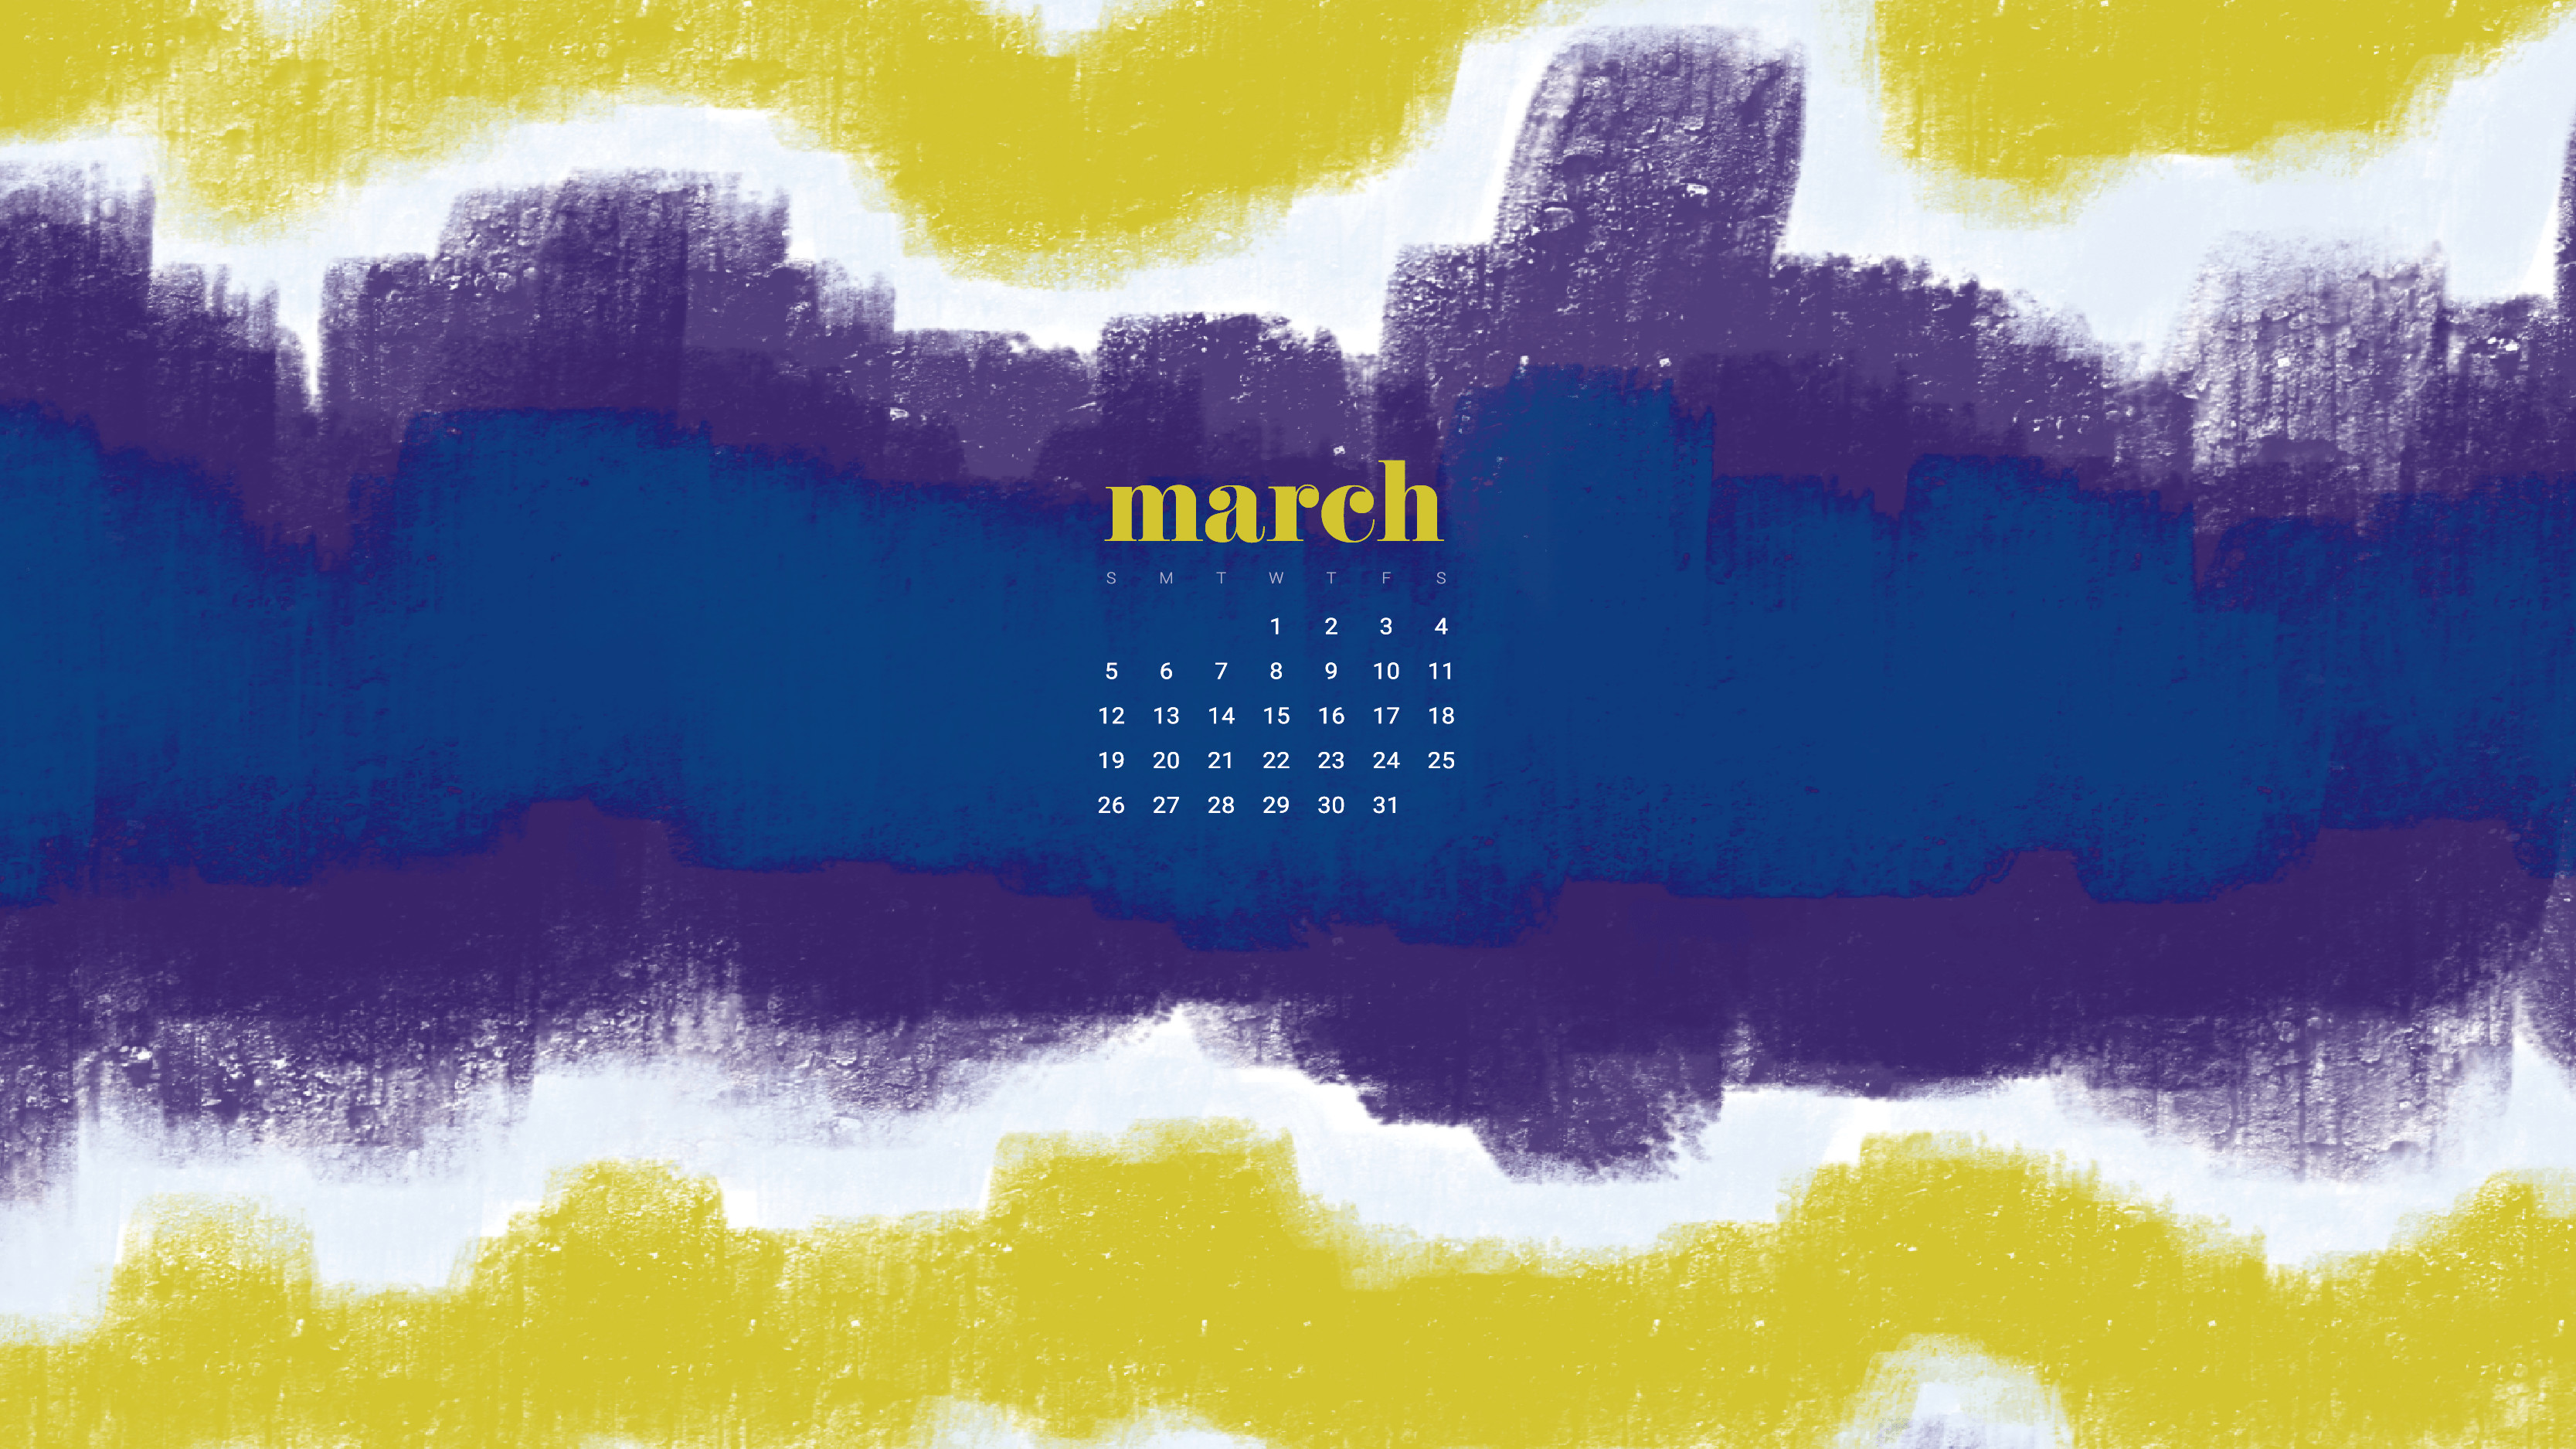 3334x1875 Oh So Lovely Blog shares free March 2017 calendar wallpapers. 6 different  desktop and smart